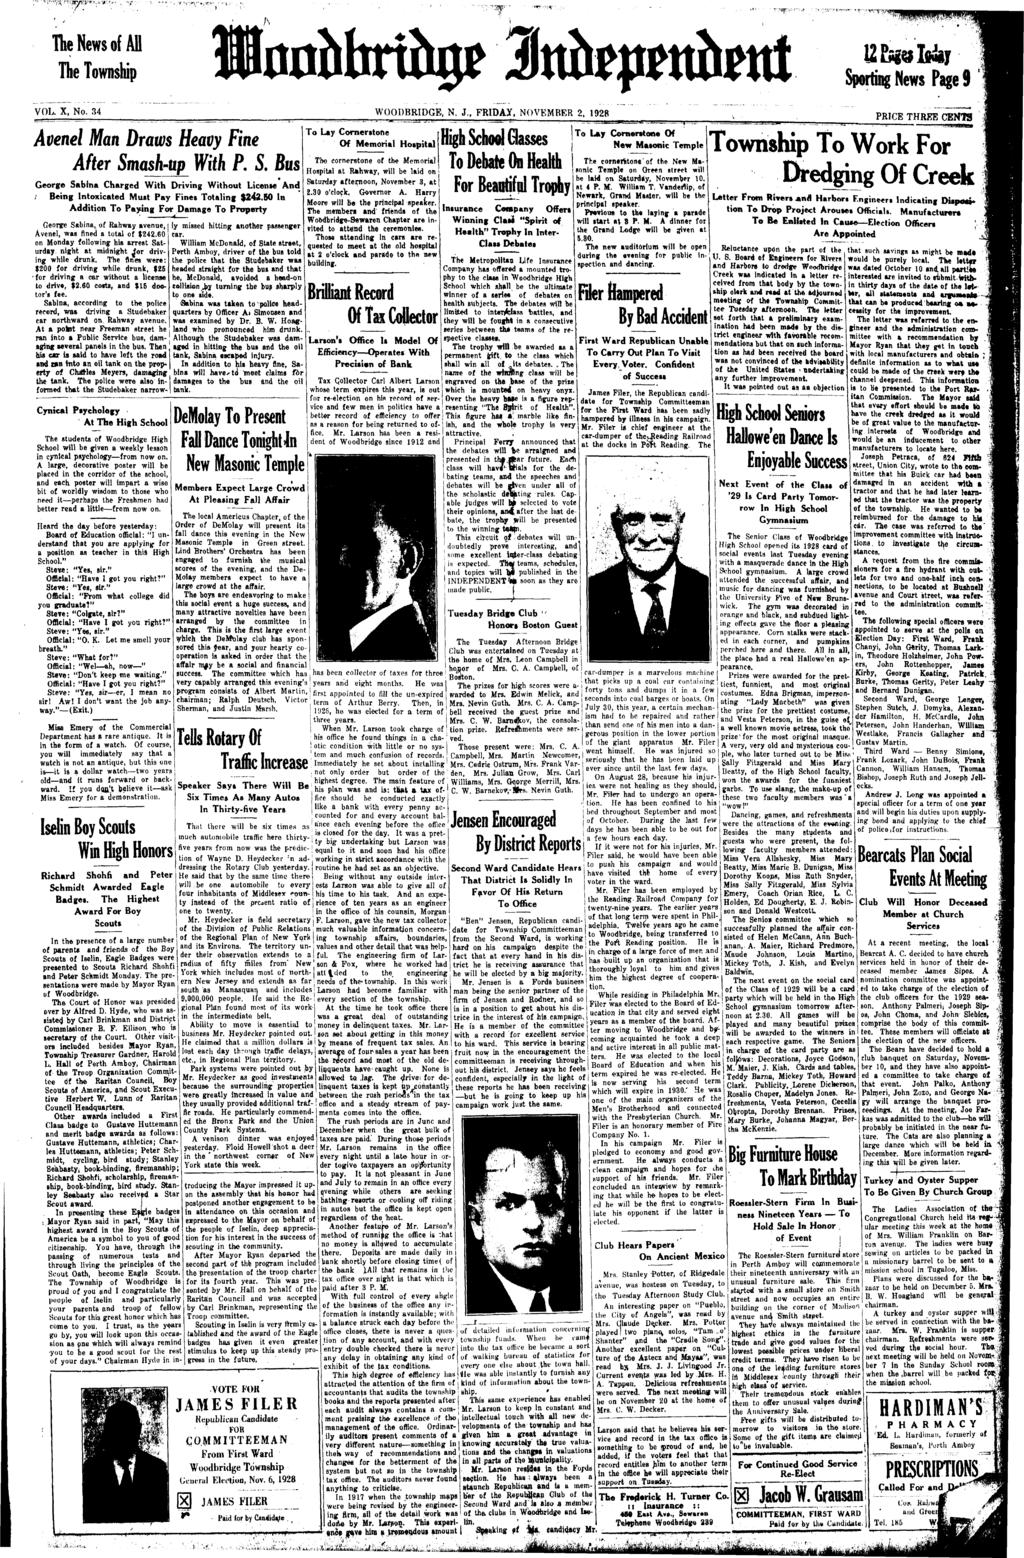 .. :, " '.. ' " ' - The News of All The Townshp Sportng News Page 9 VOL. X, No. 34 WOODBRDGB, N. J., FRDAY, NOVEMBER 2, 1928 Avenel Man Draws Heavy Fne After Smash-up Wth P. S. Bus George Sabna Charged Wth Drvng Wthout Lcense And ; Beng ntoxcated Must Pay Fnes Totalng $242.